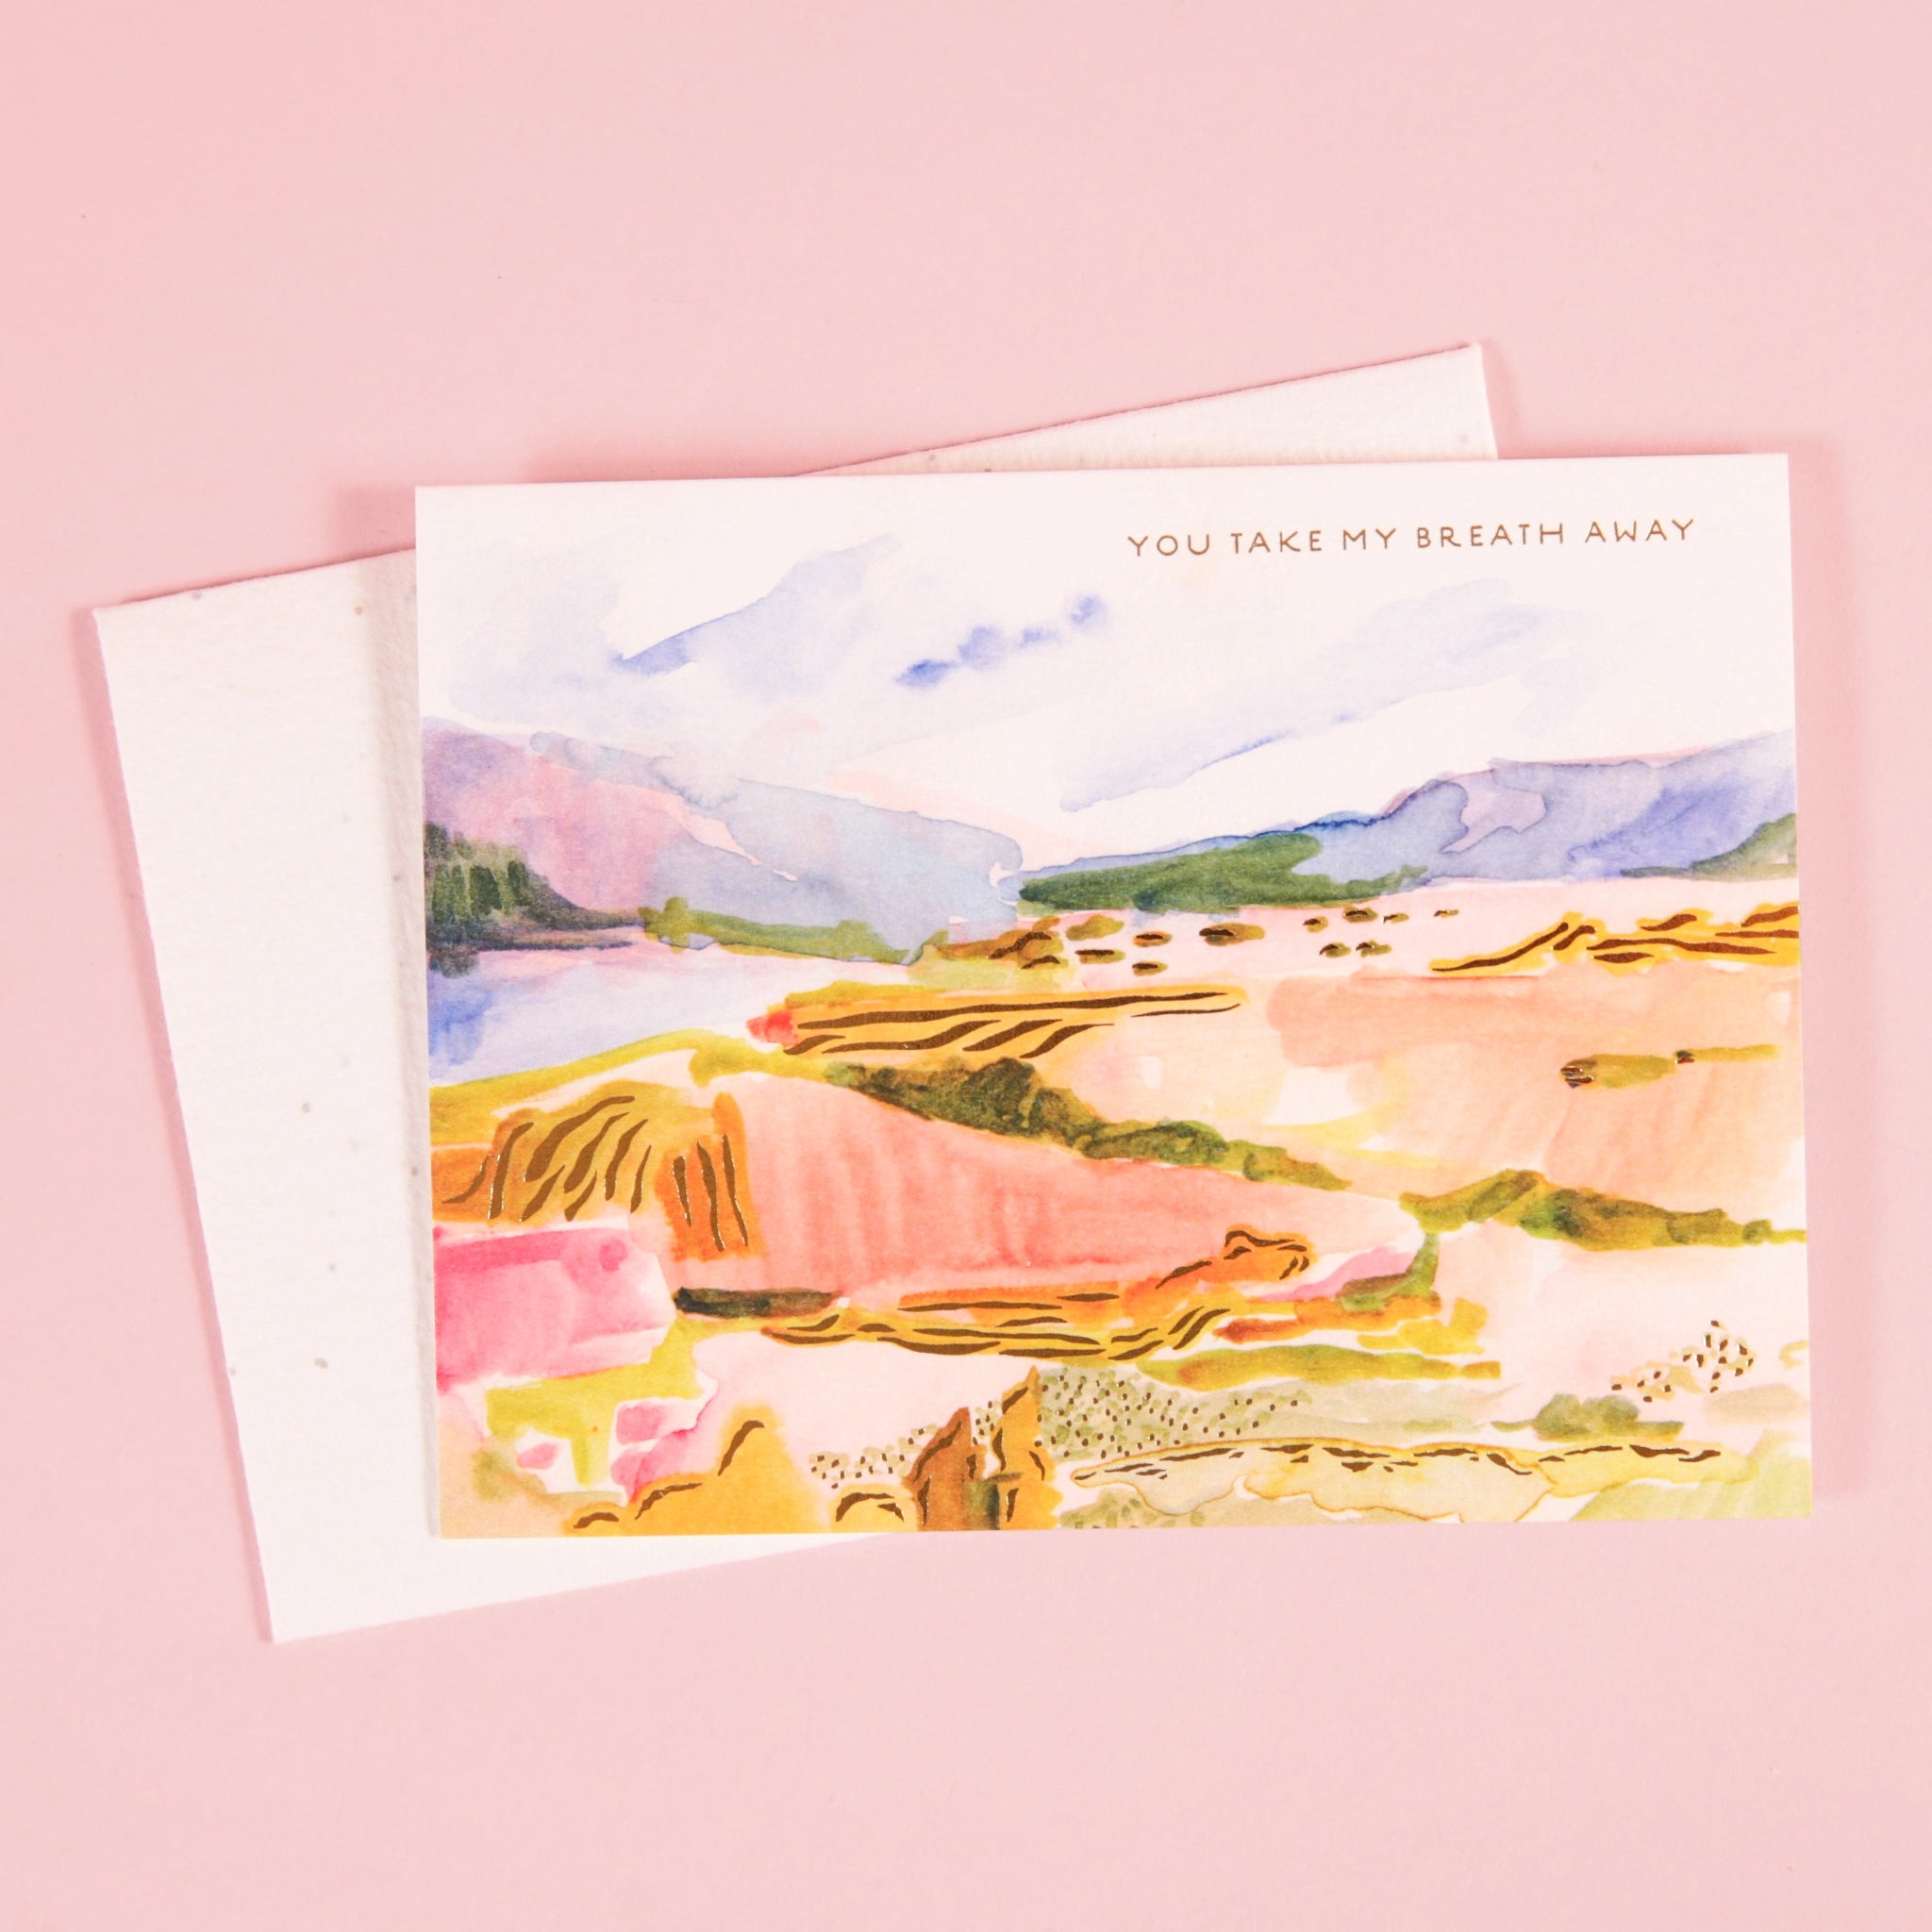 On a light pink background is a white envelope and card with a colorful illustration of a landscape and small text in the top right corner that reads, "You take my breath away".